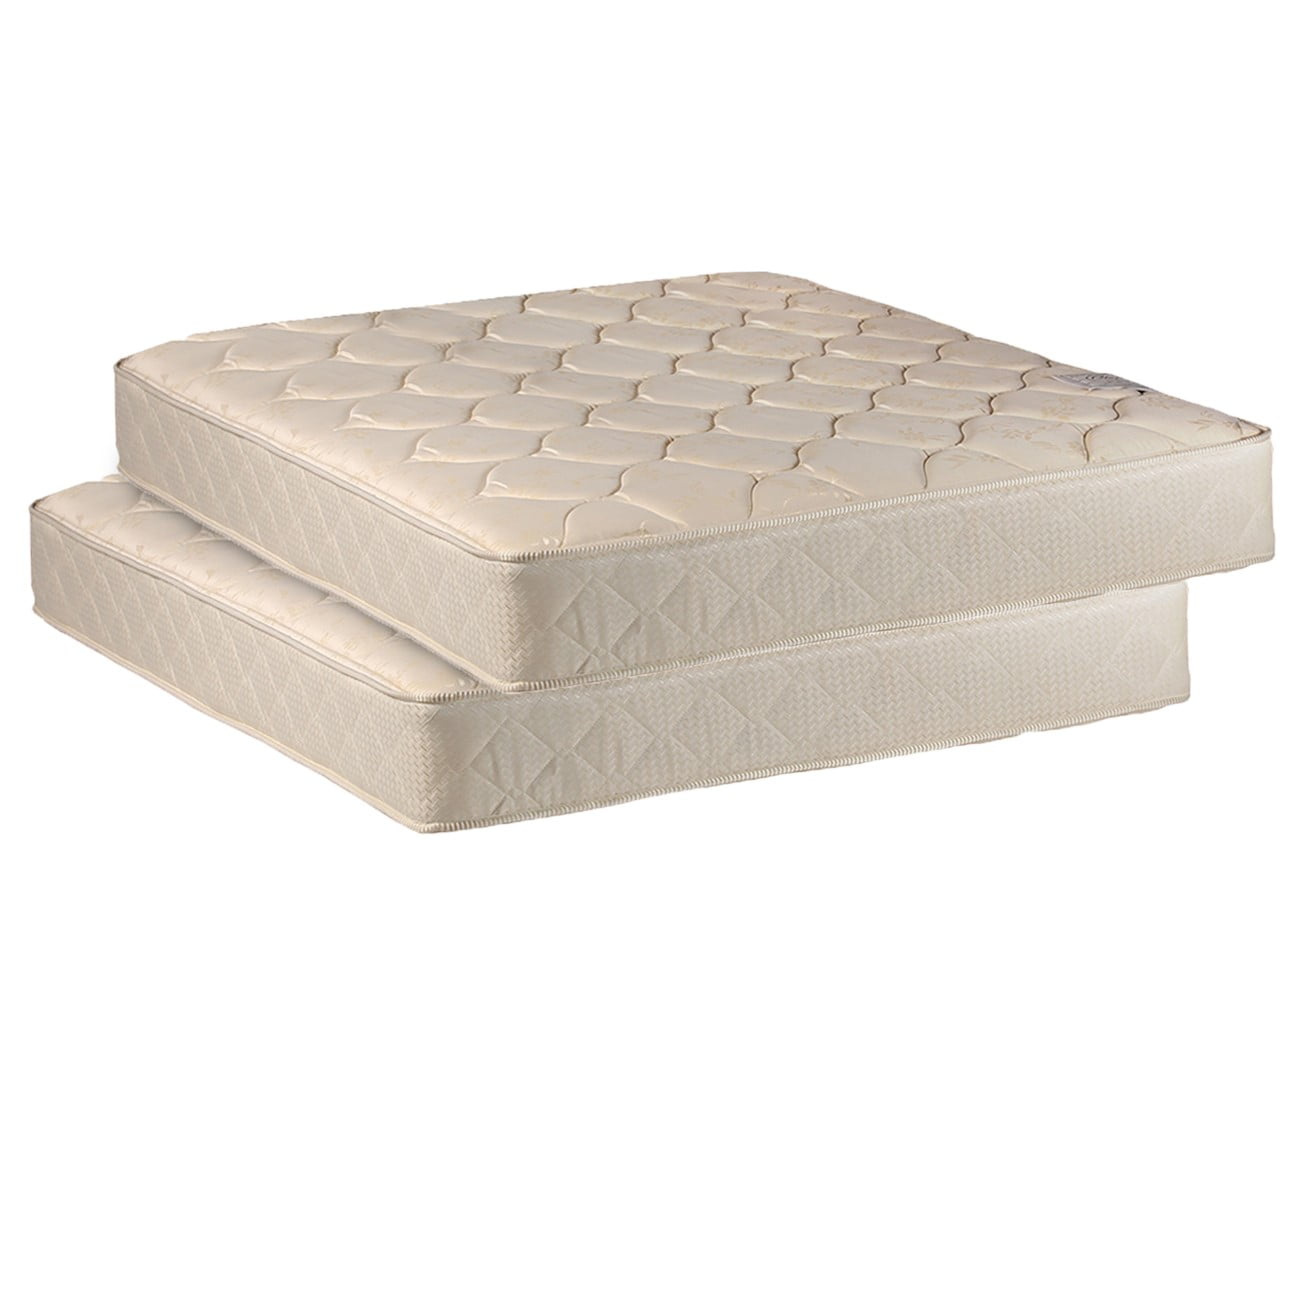 Two Twin Mattresses Package For Bunk, Twin Foam Mattress For Bunk Bed